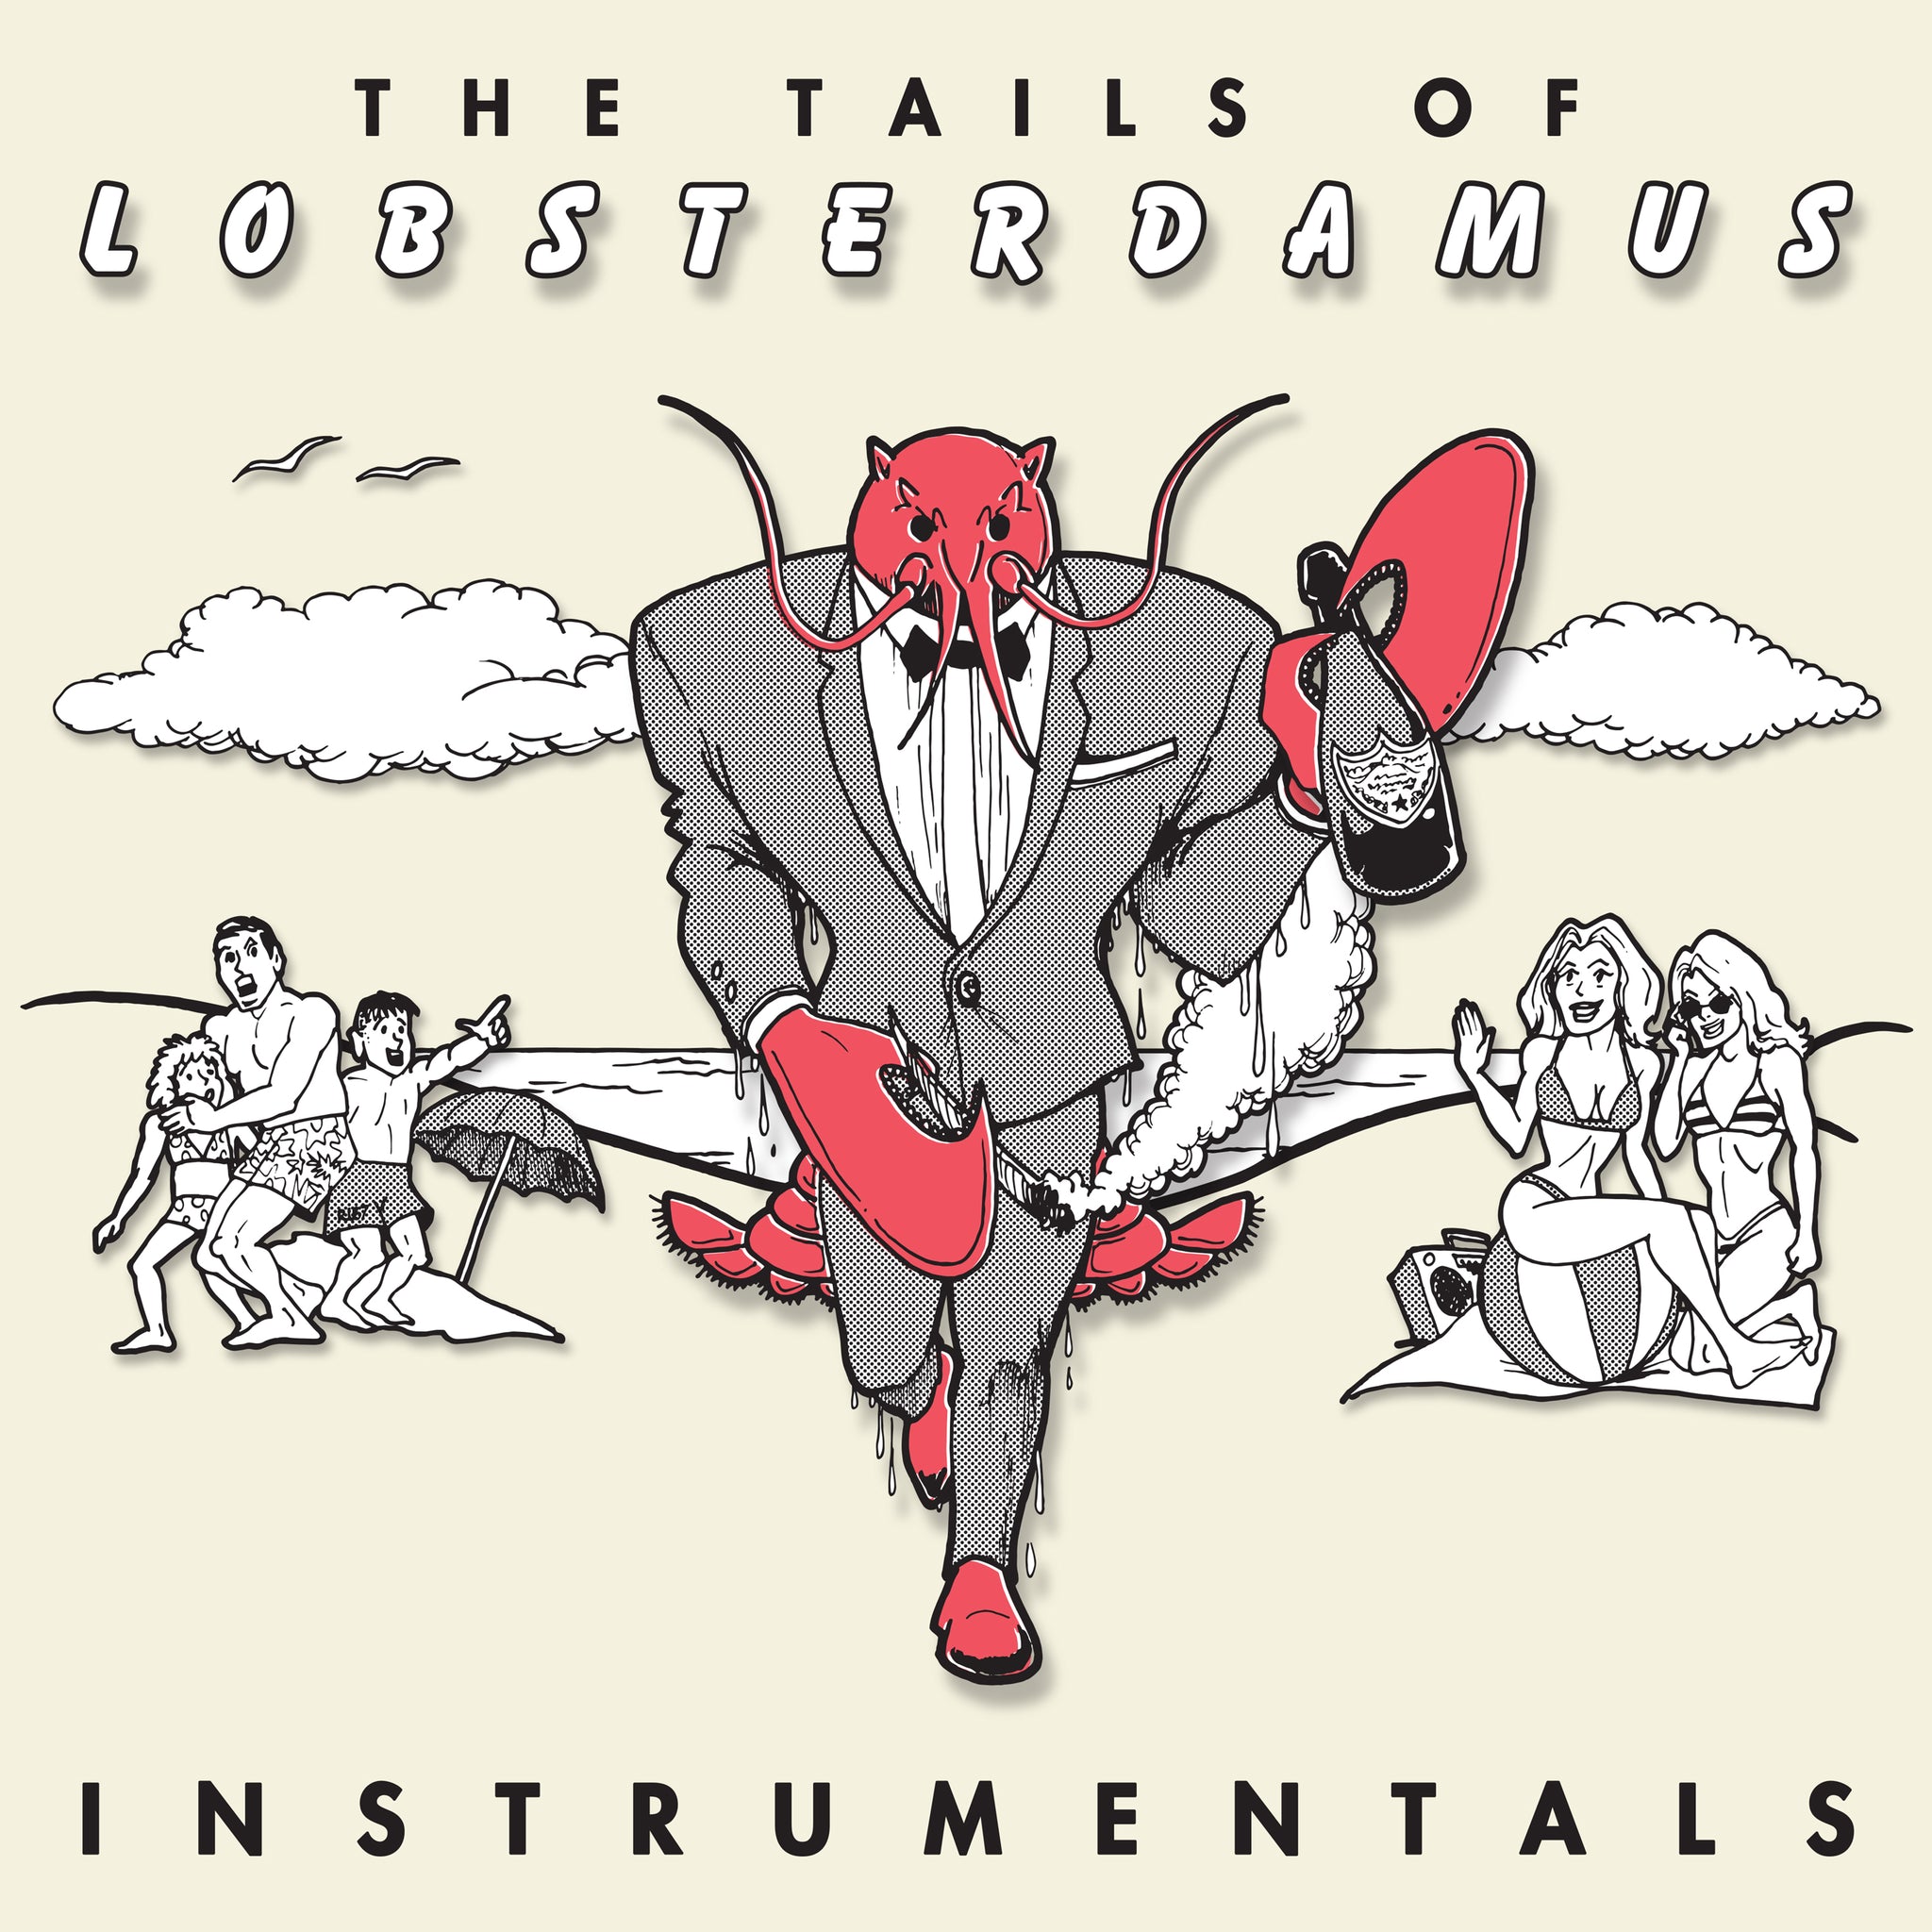 Dillon Presents: The Tails of Lobsterdamus (Instrumentals)